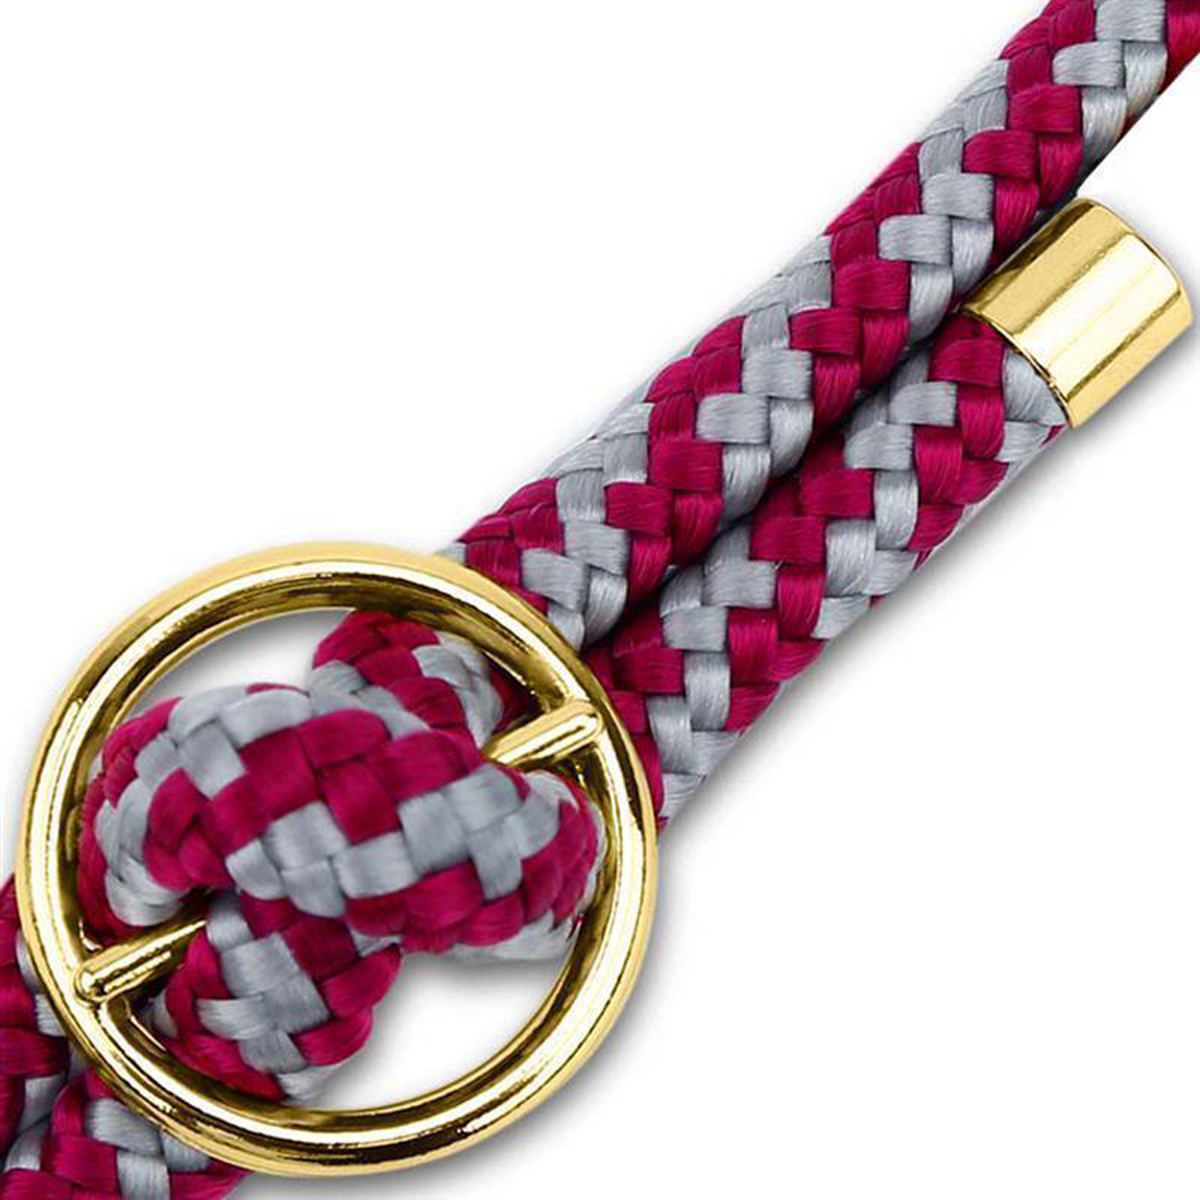 CADORABO Handy Kette mit ROT Kordel NOTE Ringen, PLUS, WEIß Gold Galaxy Band abnehmbarer und Samsung, 10 Hülle, Backcover